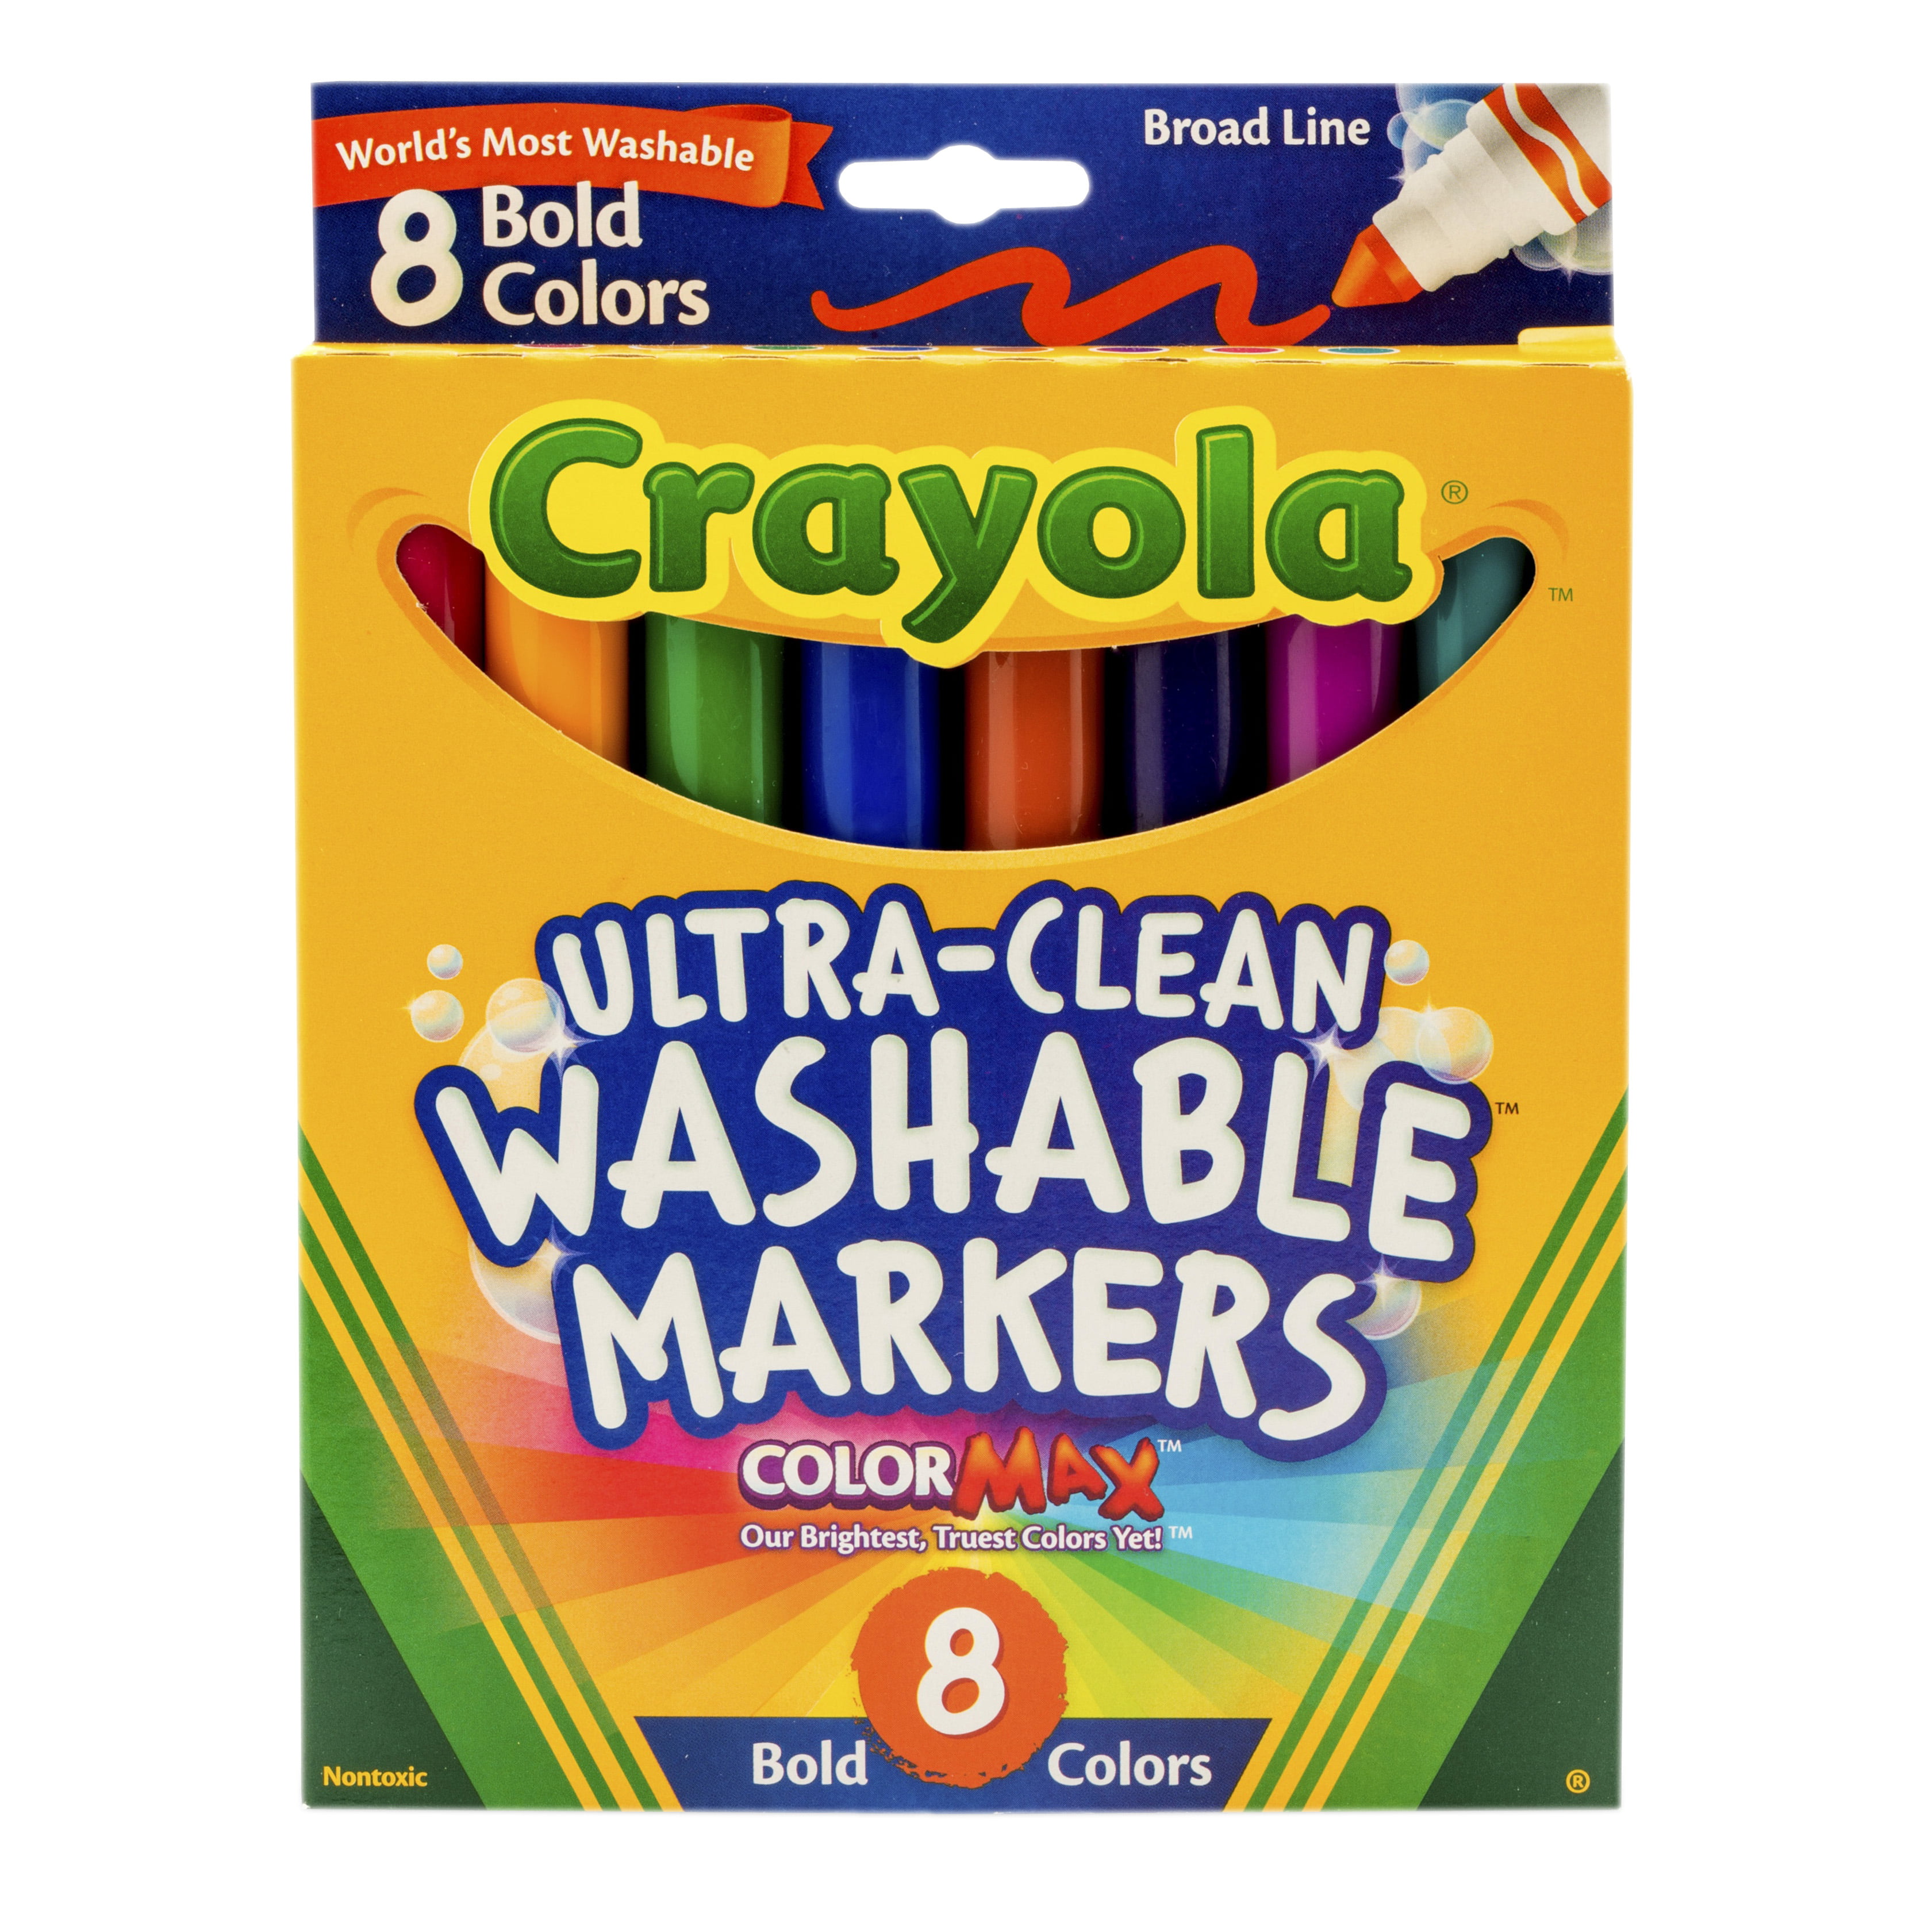 Marker Crayola Washable Broadline Bold Pack 8 Suitable for 3 years 